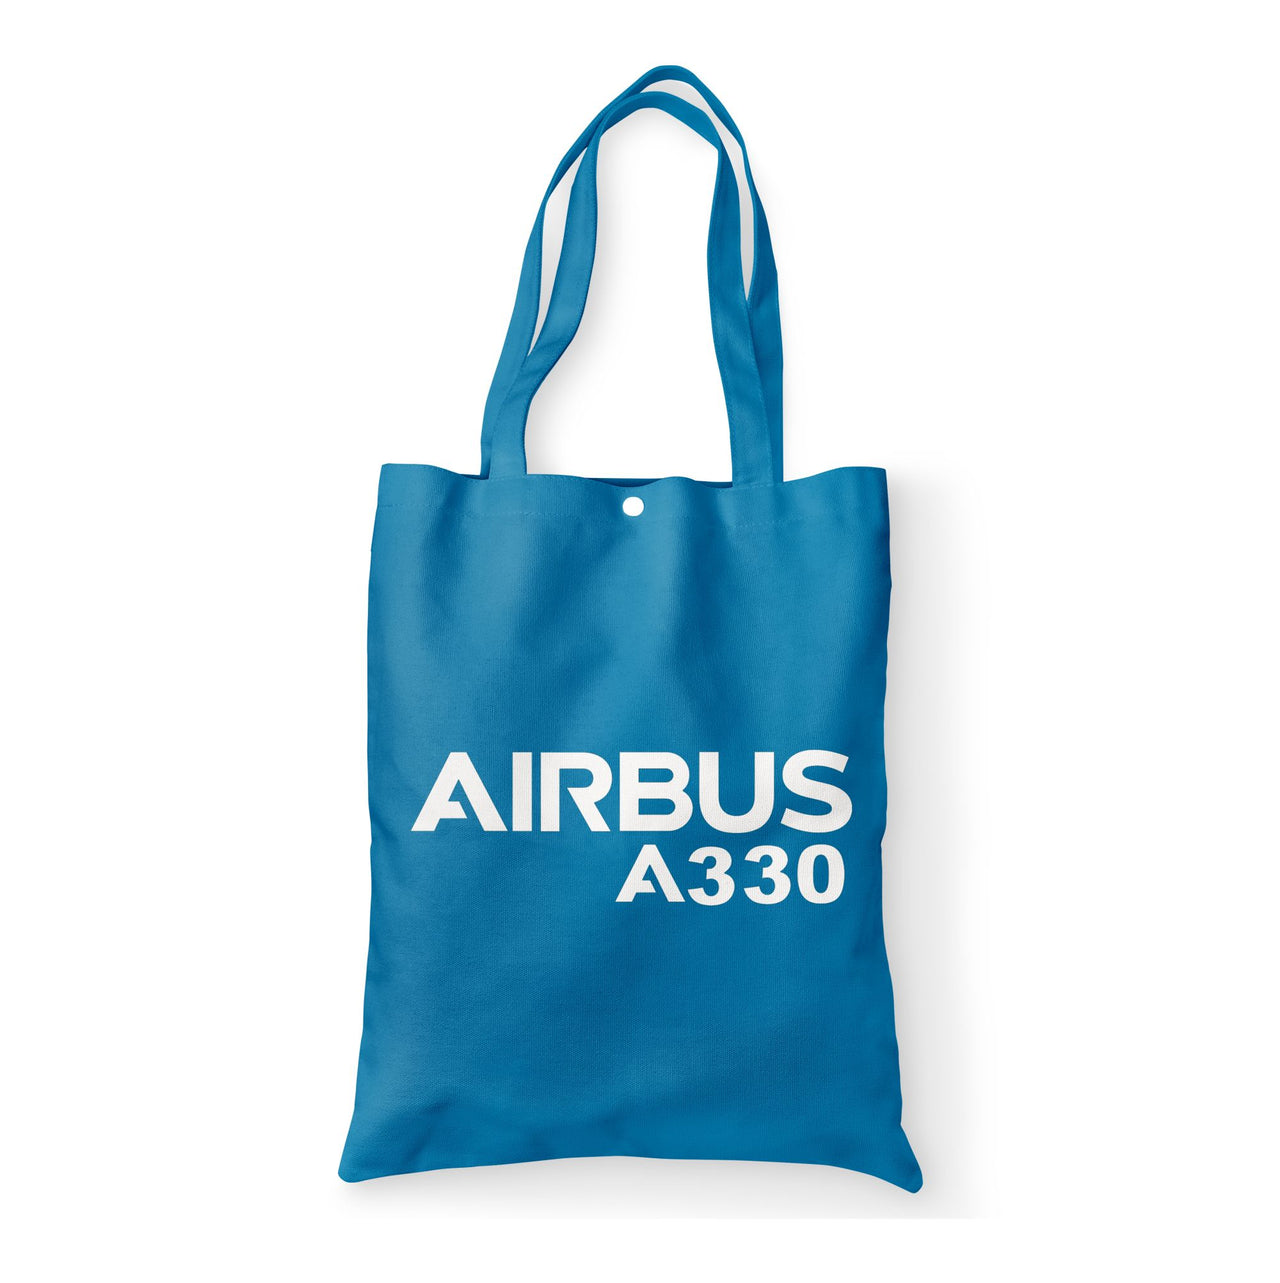 Airbus A330 & Text Designed Tote Bags